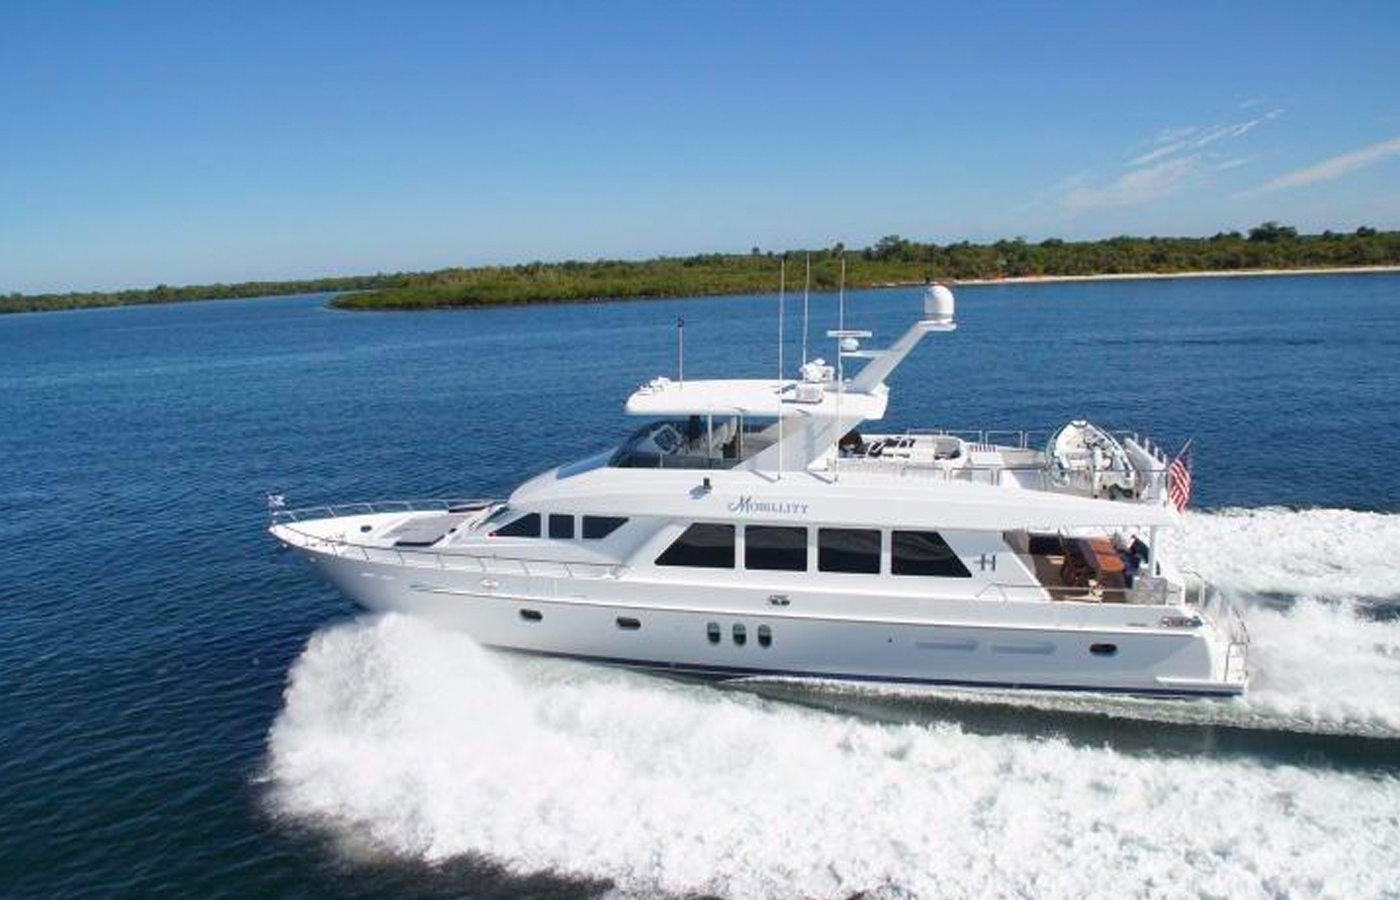 84′ Hargrave MOBILLITY Sold By Denison Yacht Brokers